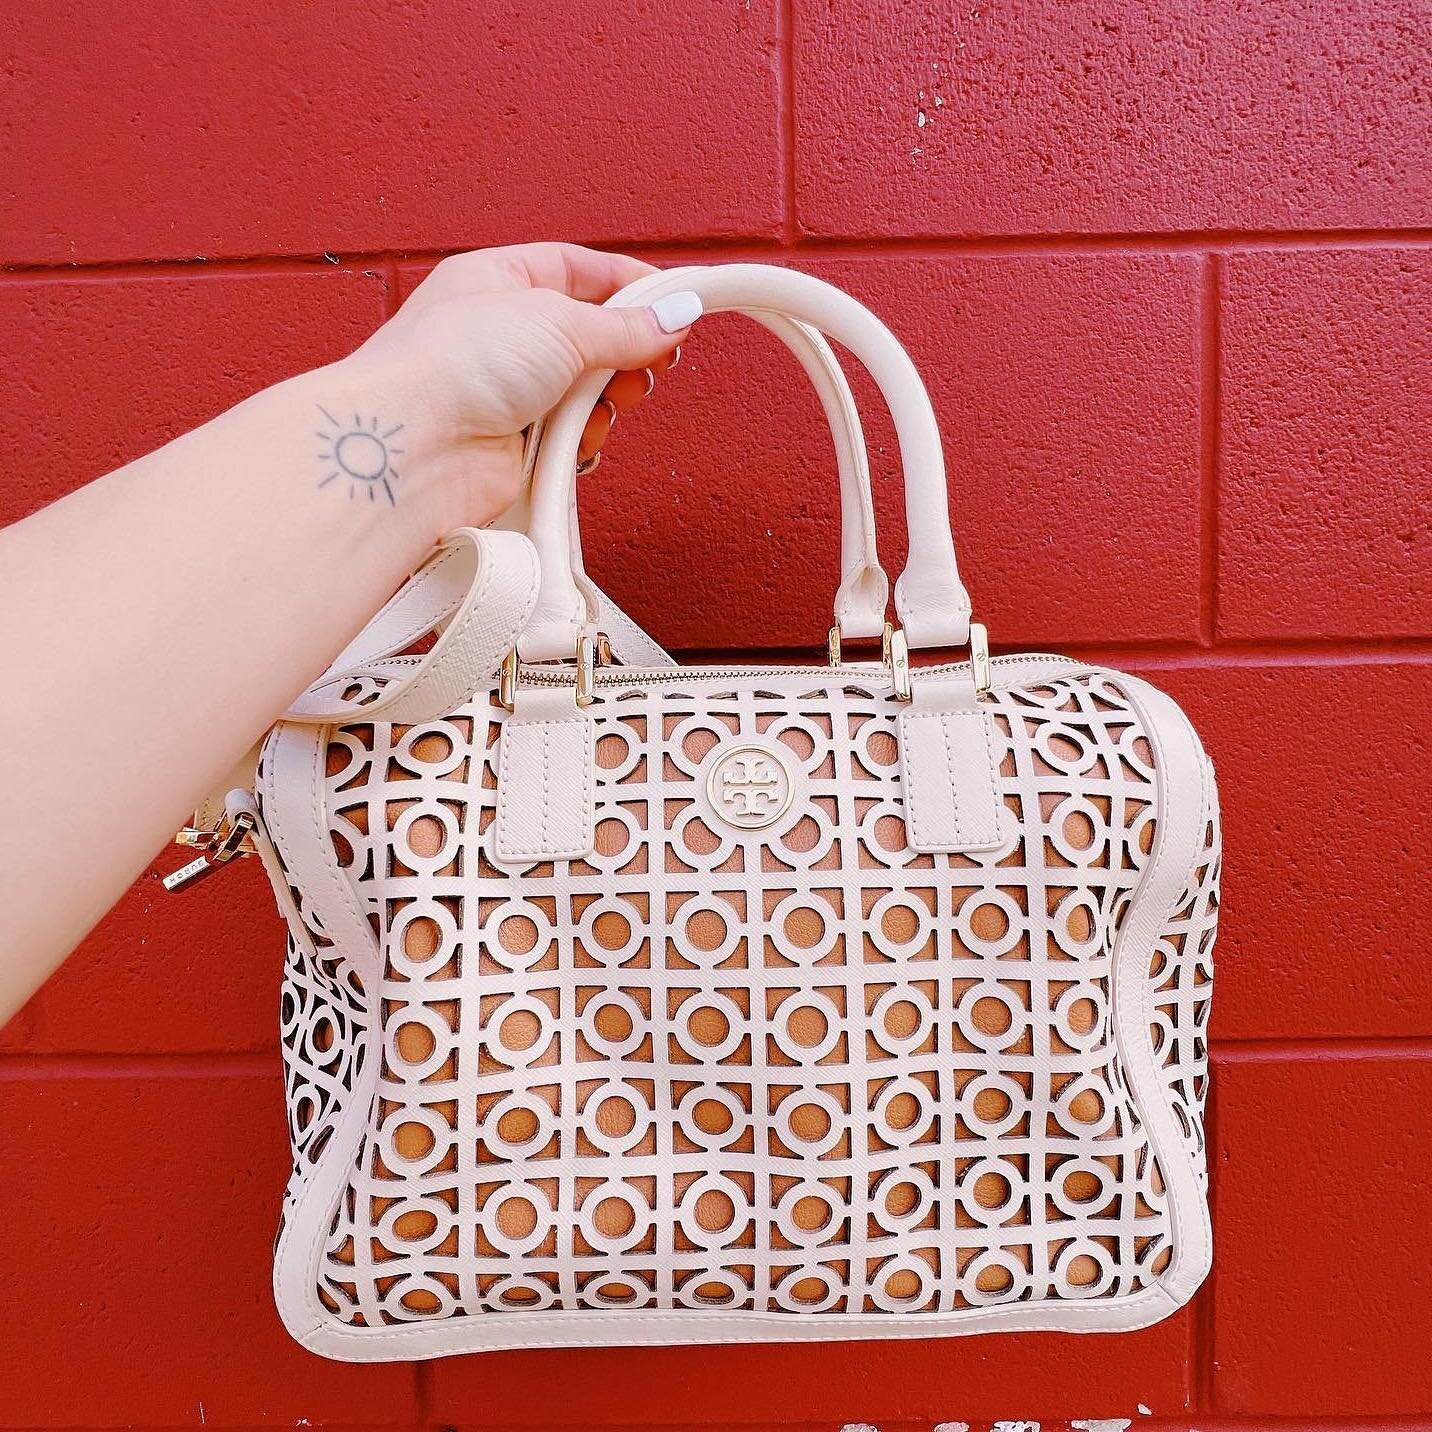 This gorgeous Kelsey Perforated Tory Burch bag is a must have!! 😍💕Available at @greenestreetgateway for $200.95
⠀⠀⠀⠀⠀⠀⠀⠀⠀
Call or email our Gateway team for availability
📞484-367-7412
📧gateway@greenestreet.com
⠀⠀⠀⠀⠀⠀⠀⠀⠀
#greenestreetgateway #wayn